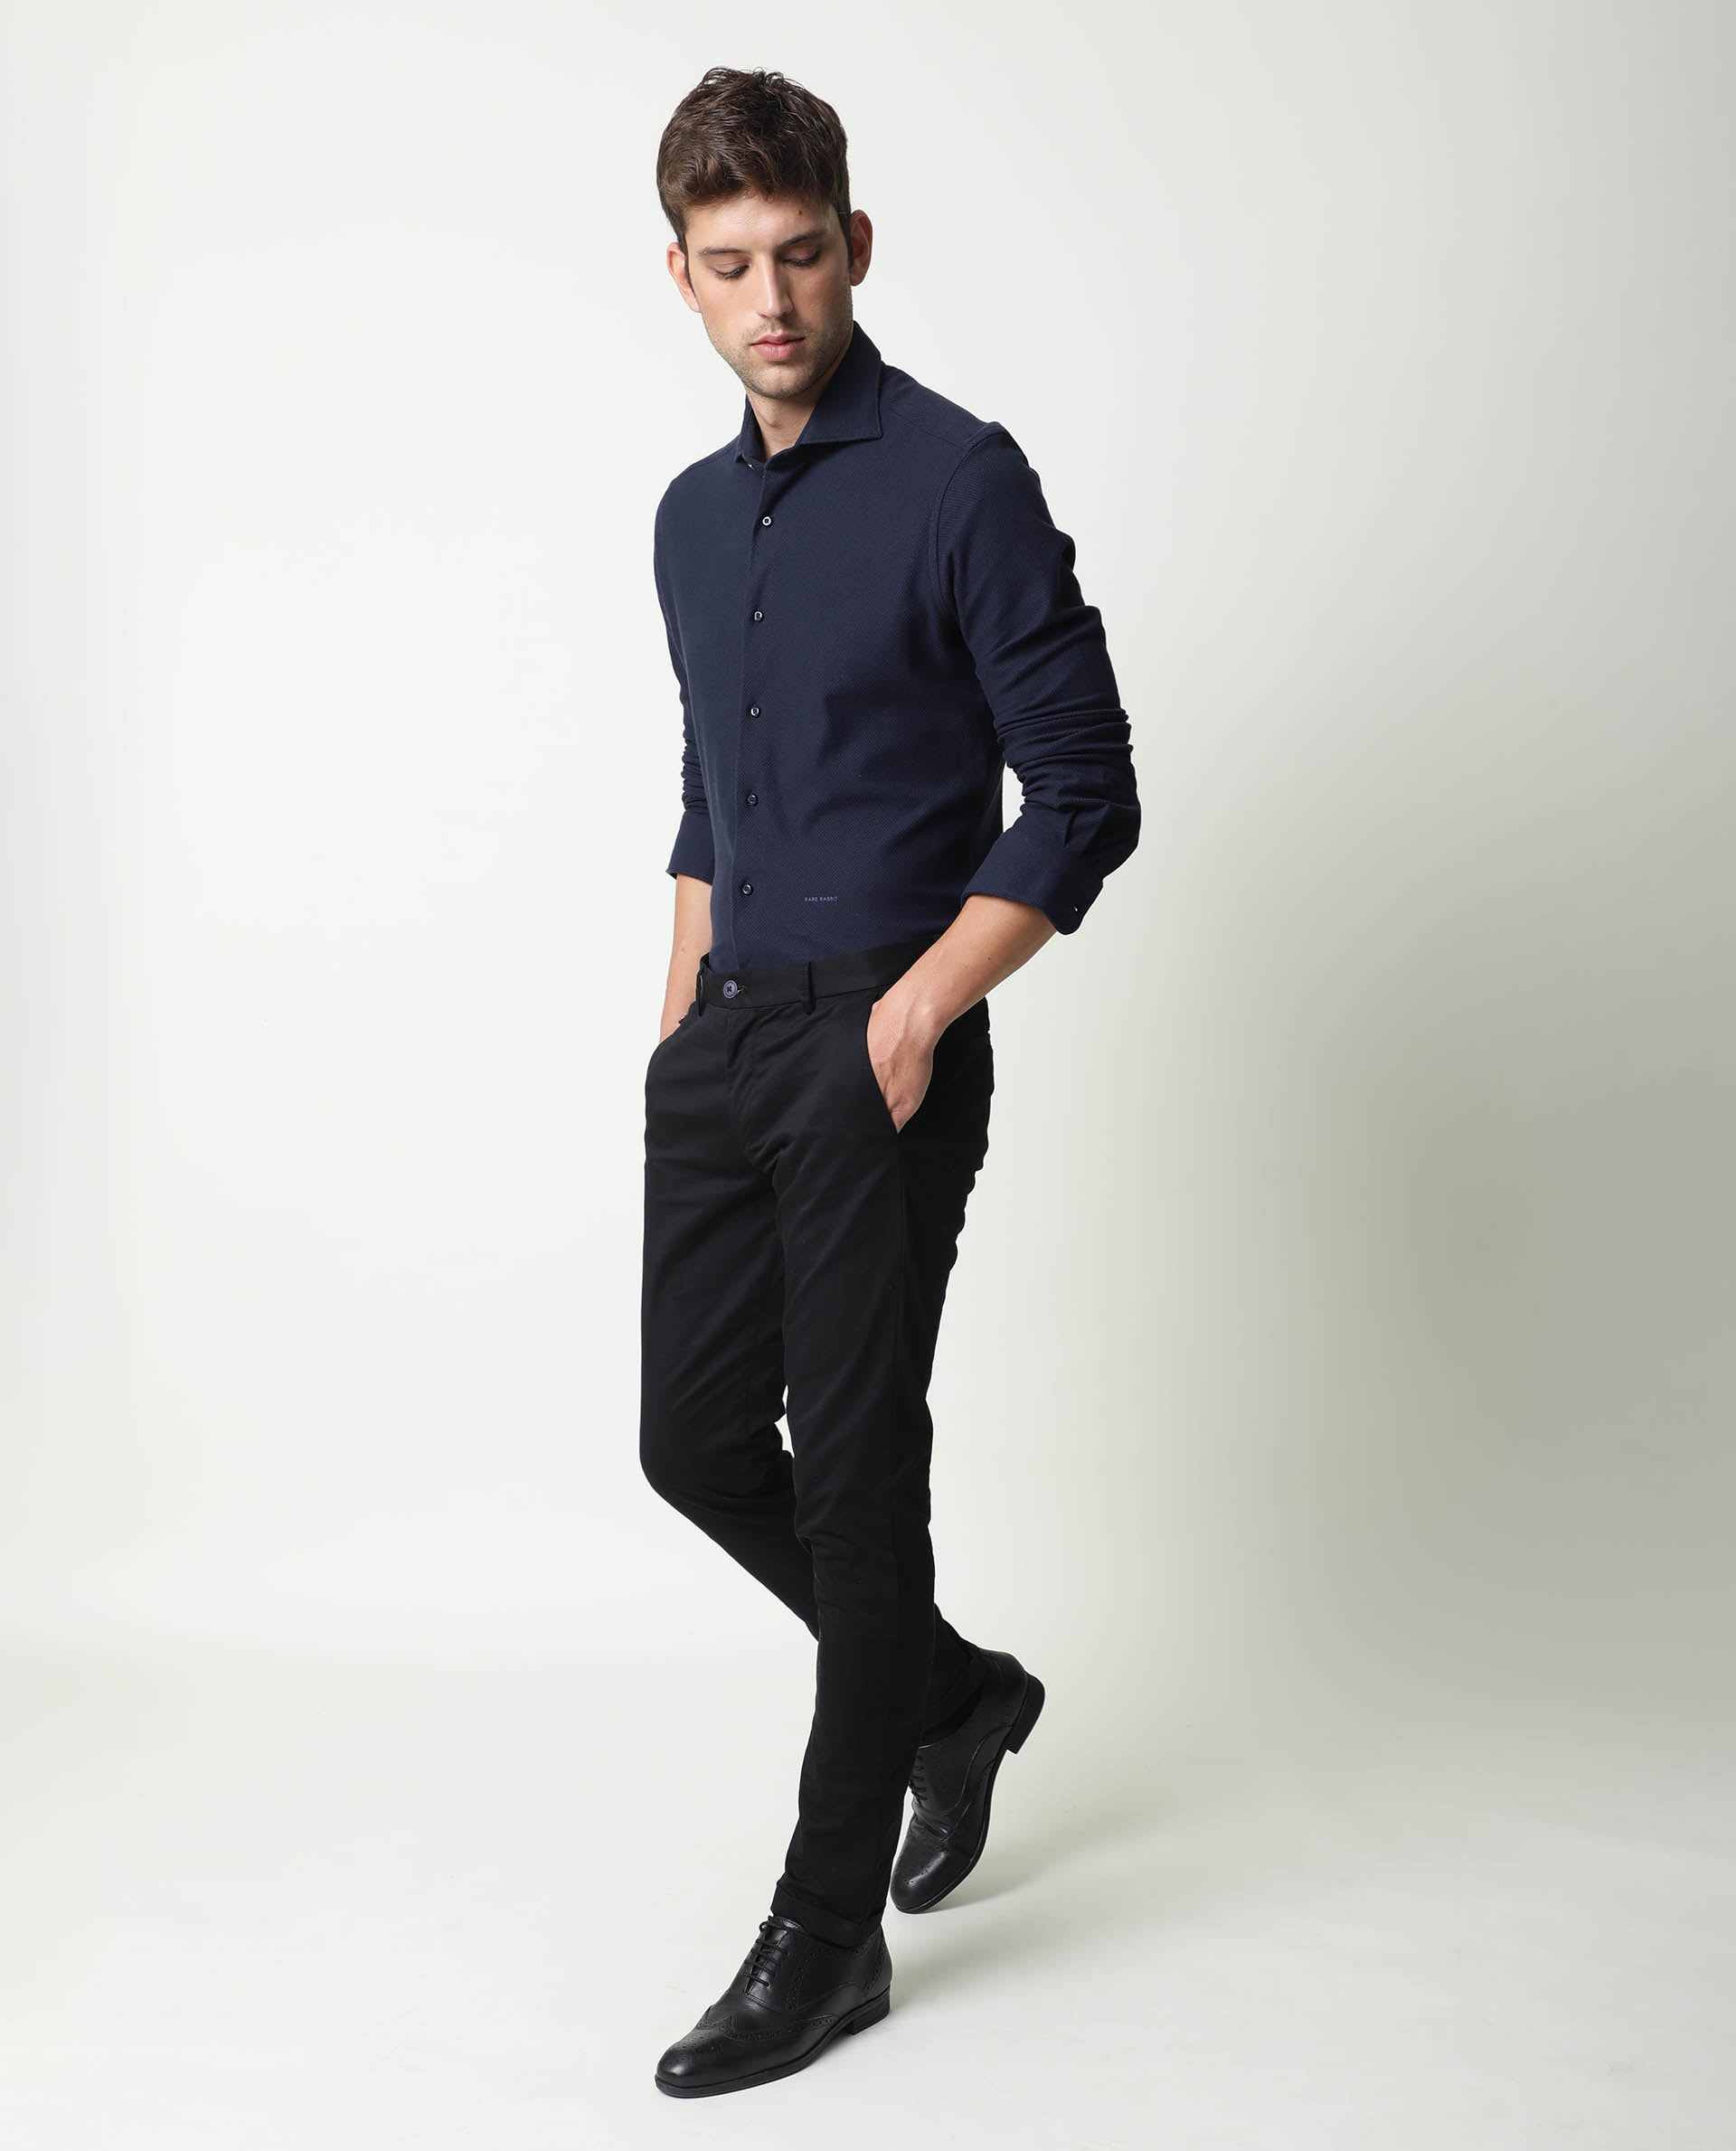 Black Pants Outfits For Men29 Ideas How To Style Black Pants  Black pants  outfit Pant shirt Navy blue pants outfit